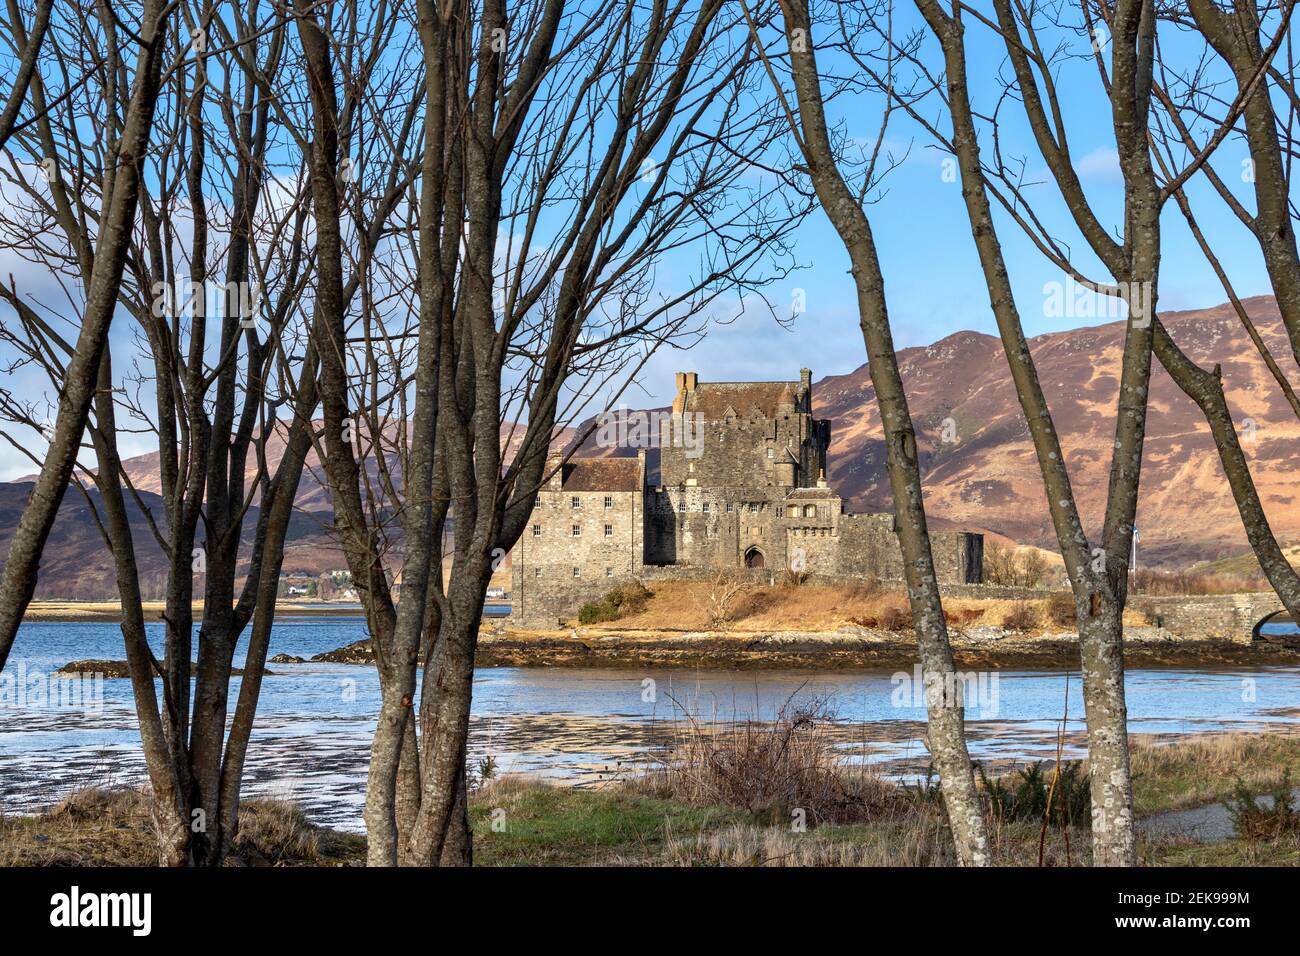 EILEAN DONAN CASTLE LOCH DUICH HIGHLAND SCOTLAND EARLY SPRING LOOKING THROUGH TREES TO THE ISLAND WITH THE FORTRESS Stock Photo